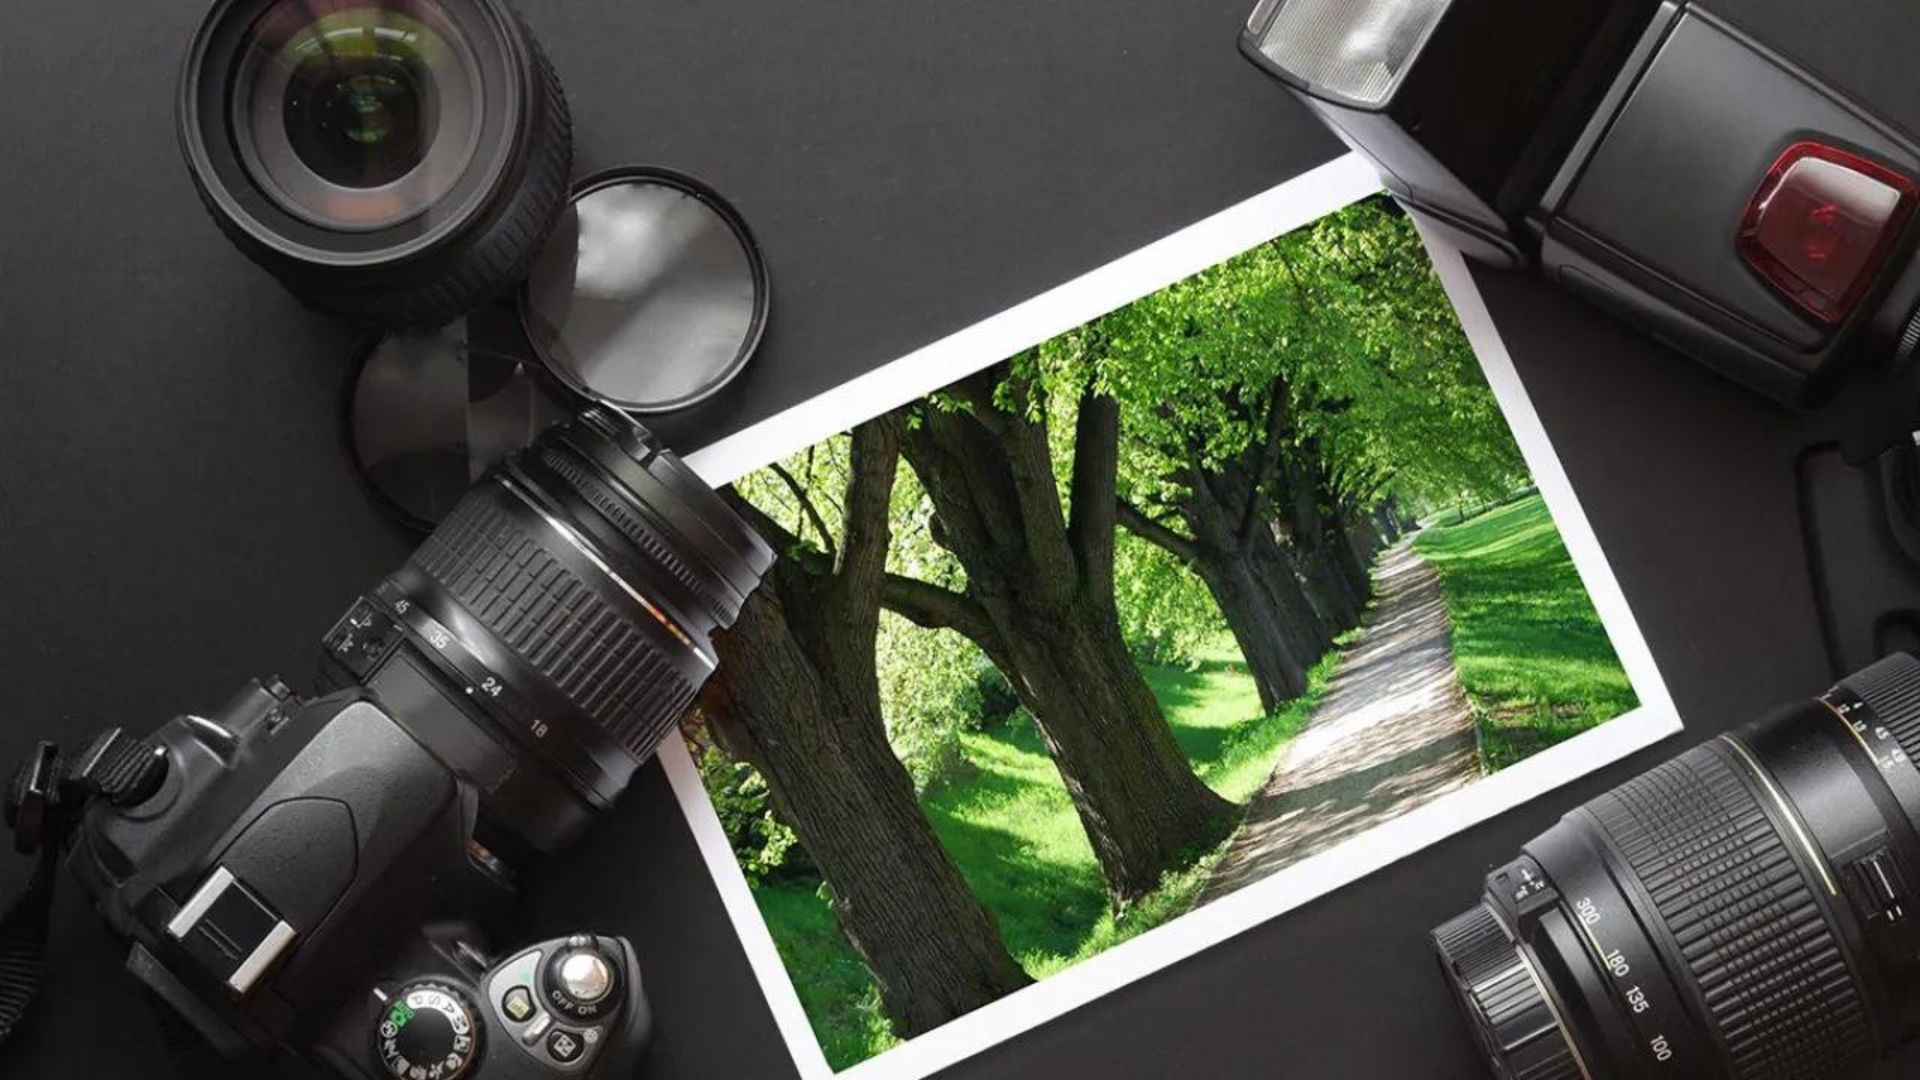 an image showing cameras and a picture of trees